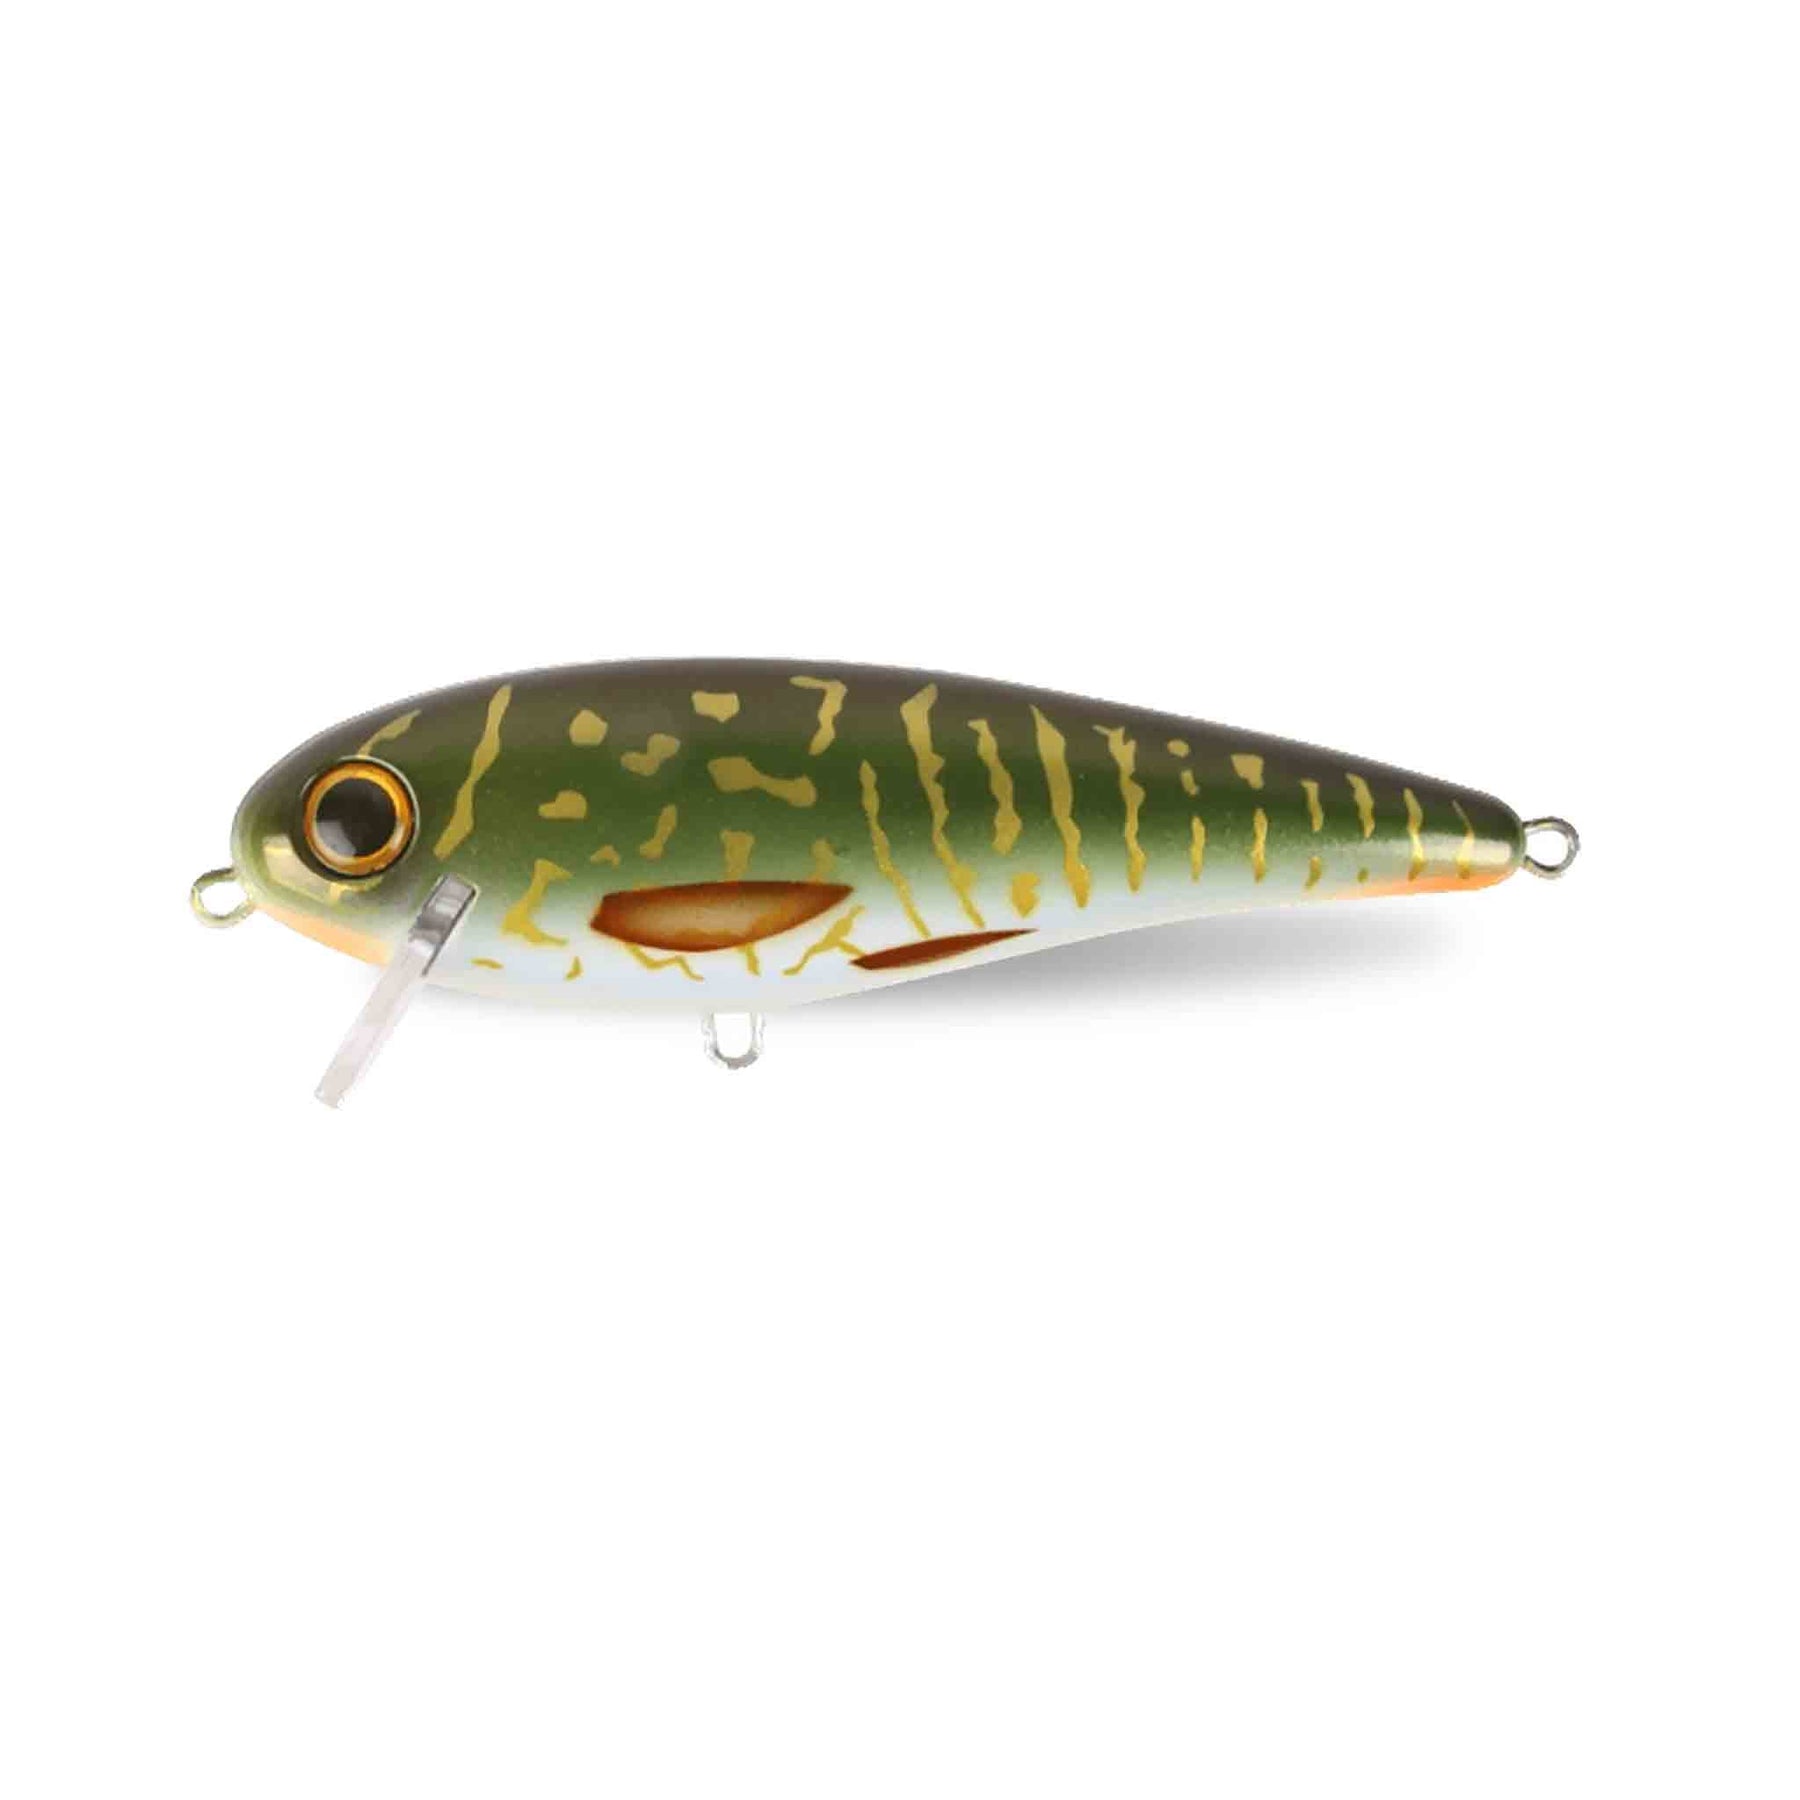 View of Crankbaits Strike Pro Jonny Vobbler 15cm Crankbait Special Pike available at EZOKO Pike and Musky Shop